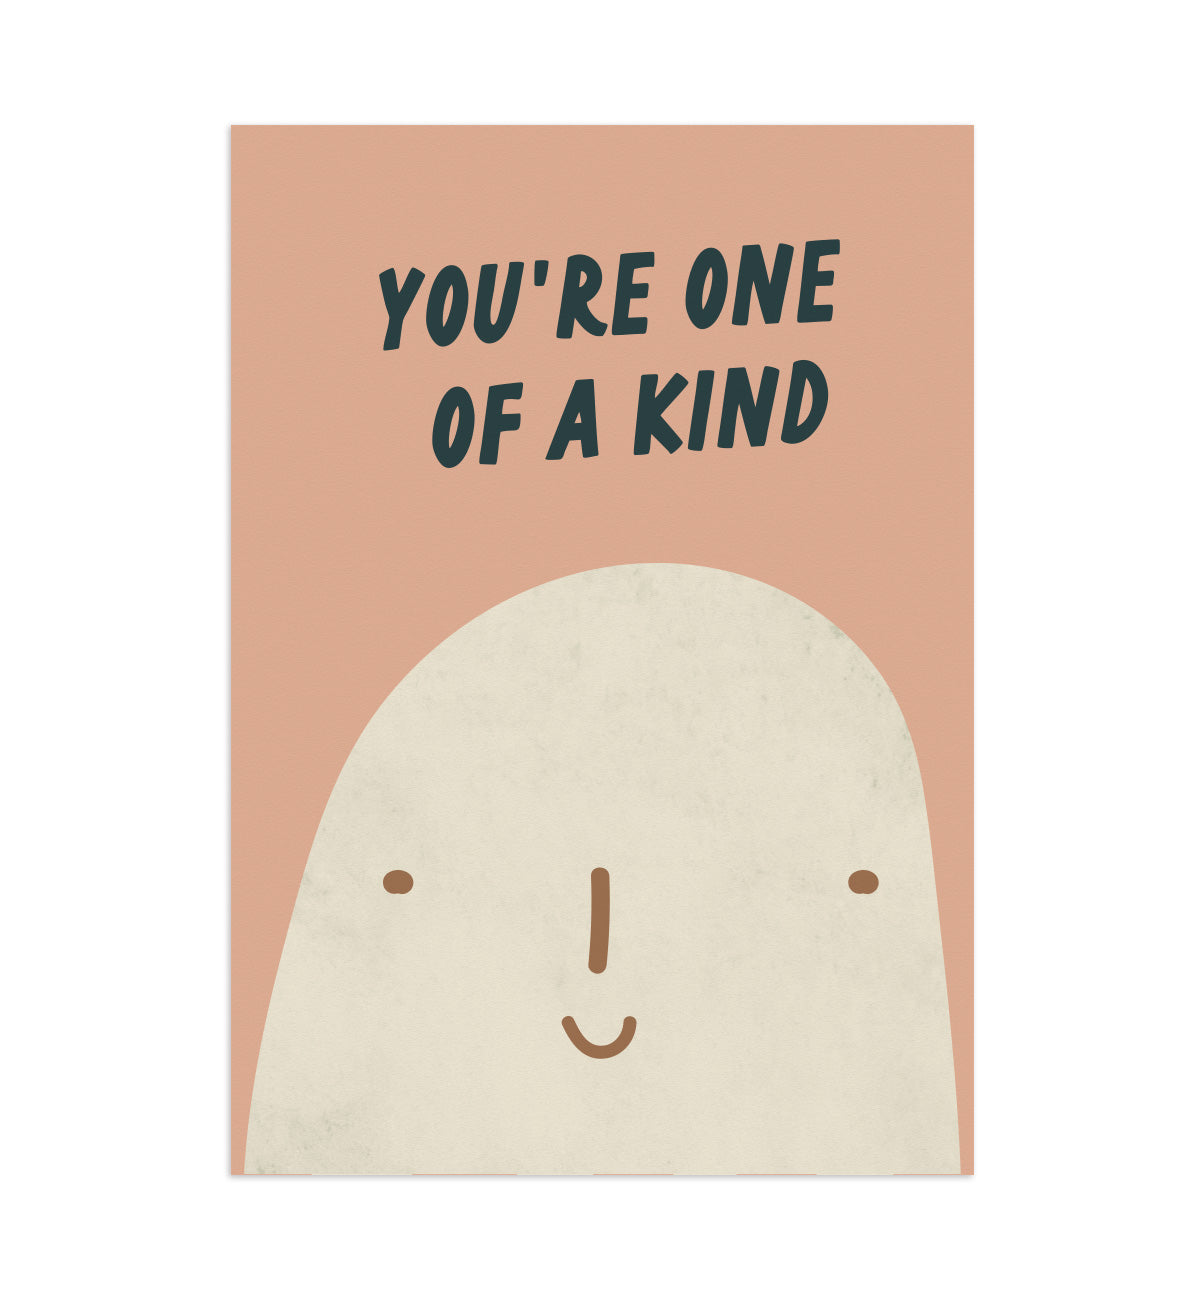 You're one of a kind poster